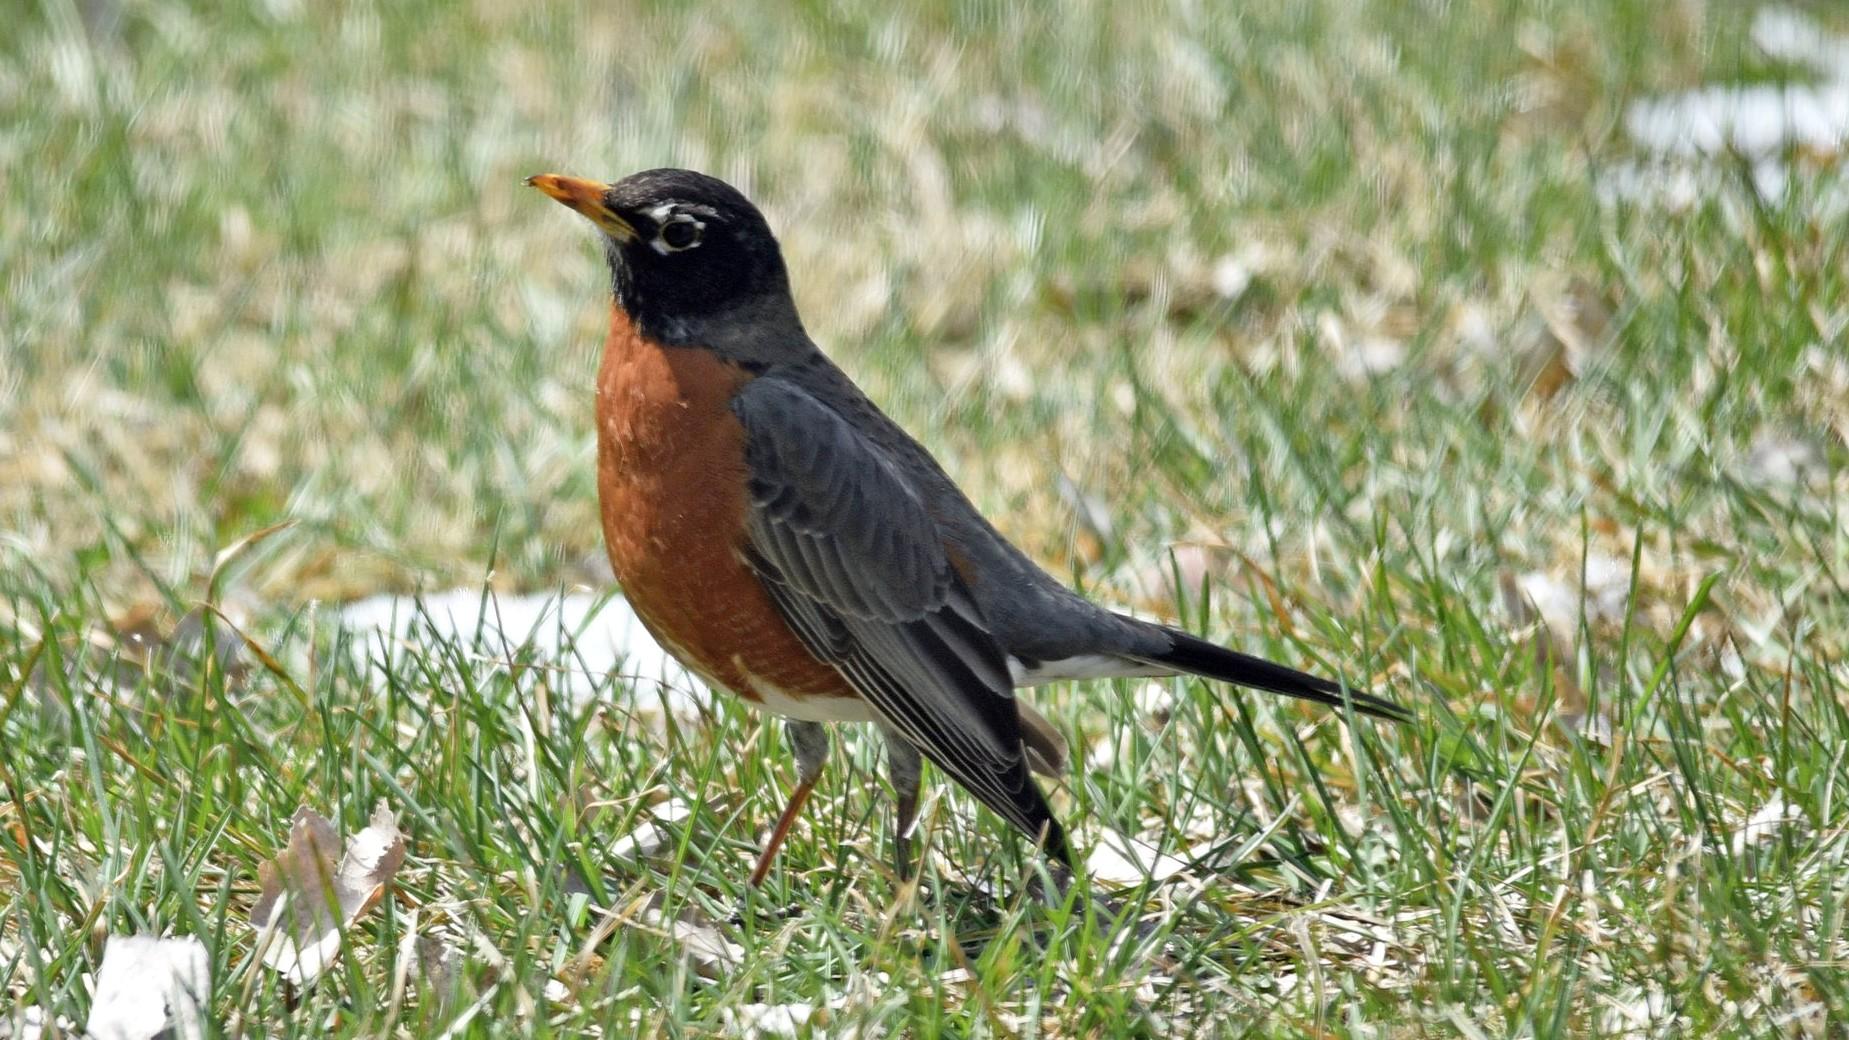 Robins used to be considered harbingers of spring, but plenty live in Chicago year-round. (U.S. Fish and Wildlife Service Midwest Region)